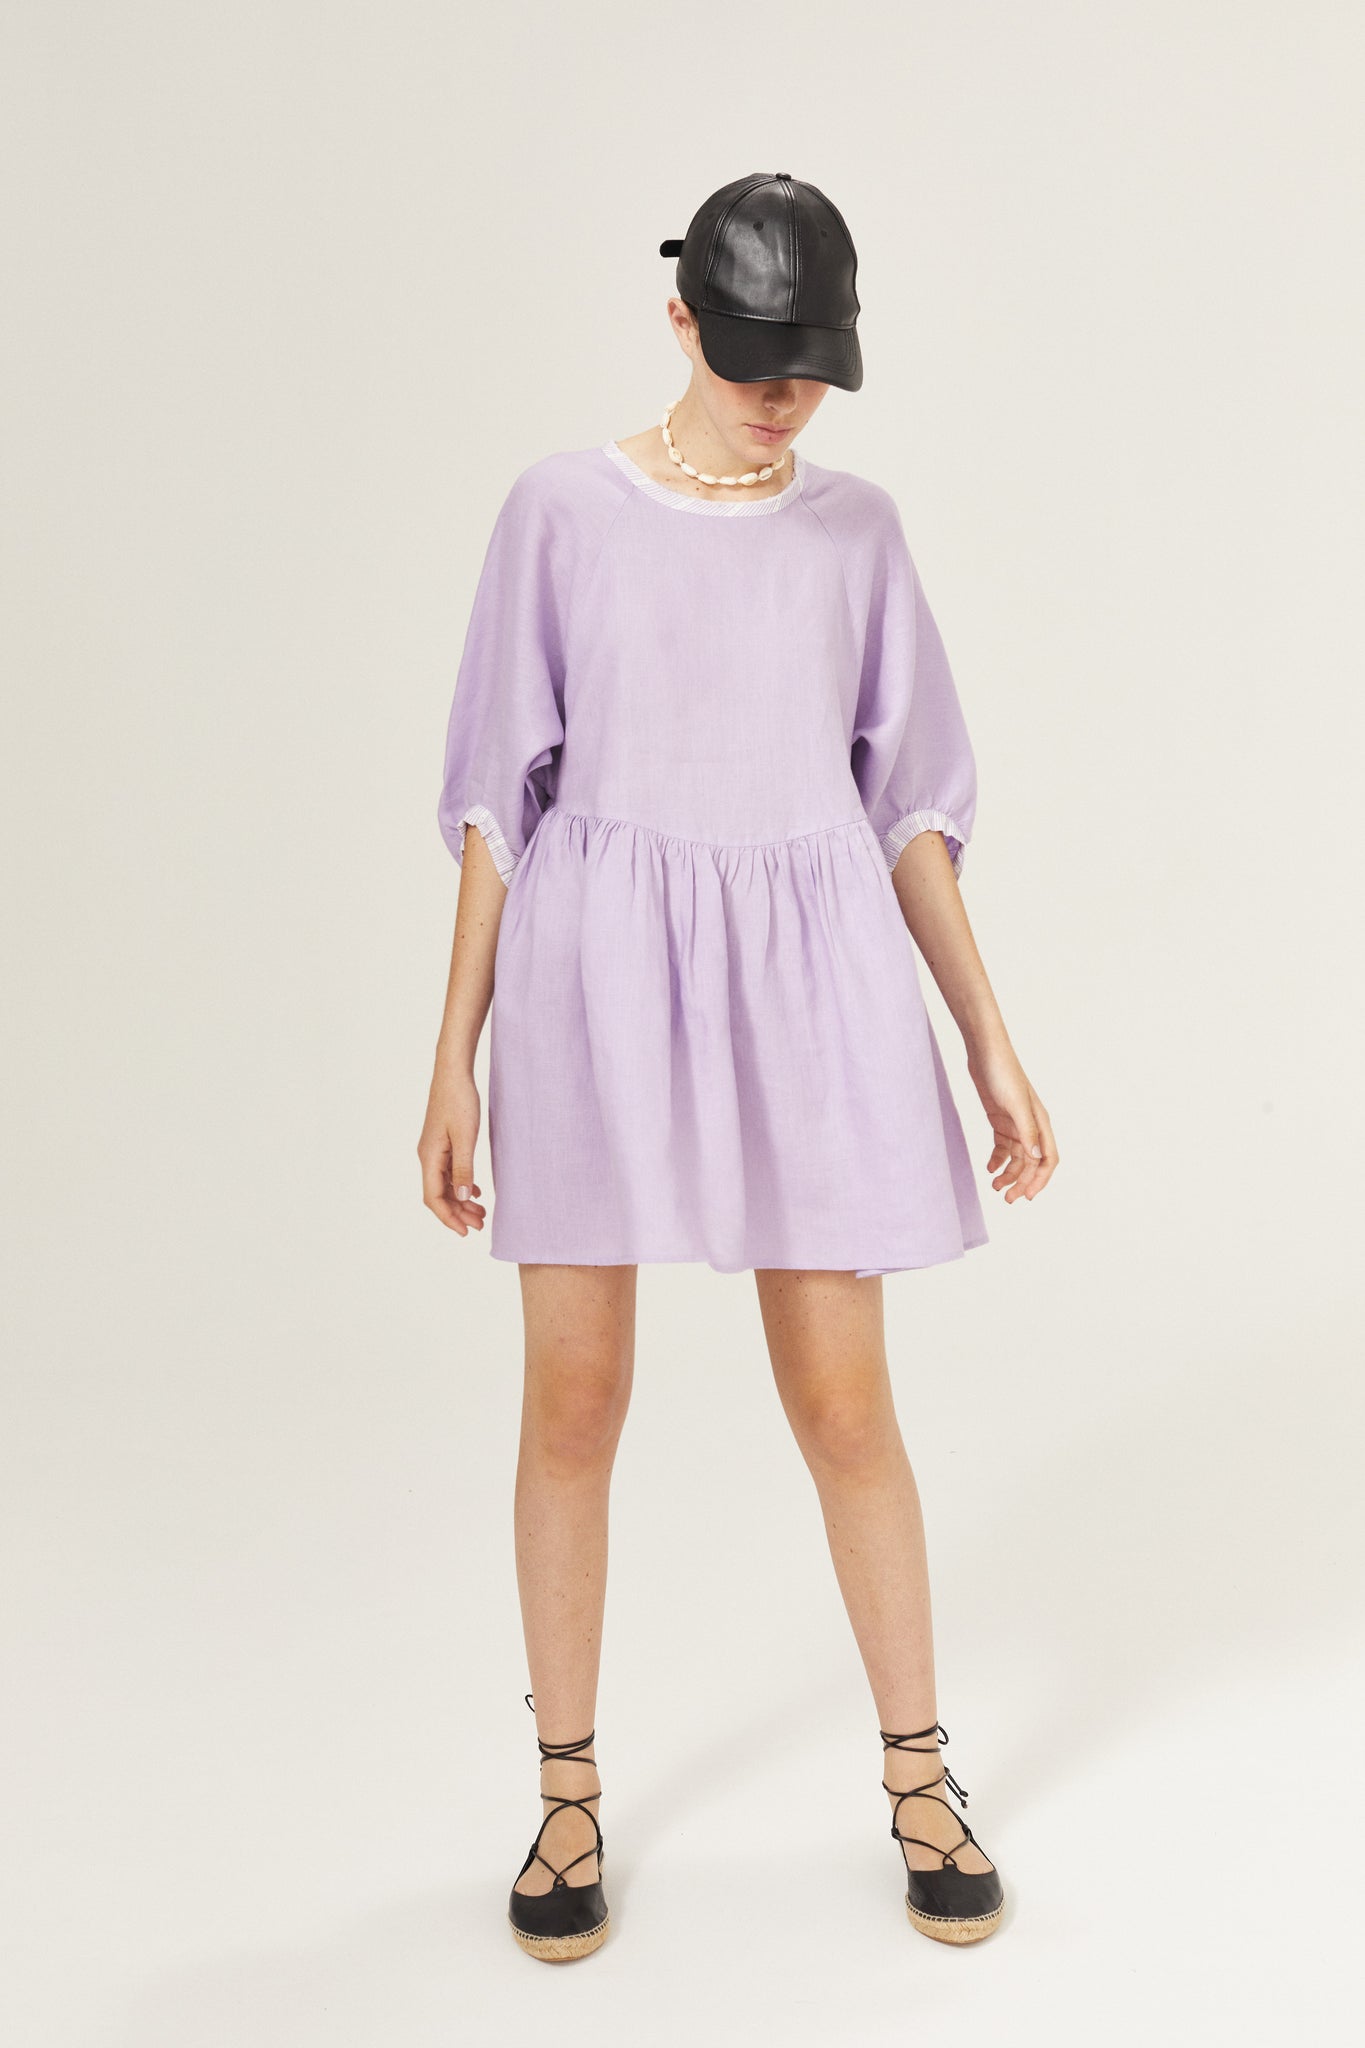 Alcala Linen Dress - Bright Lilac with Contrasting Details